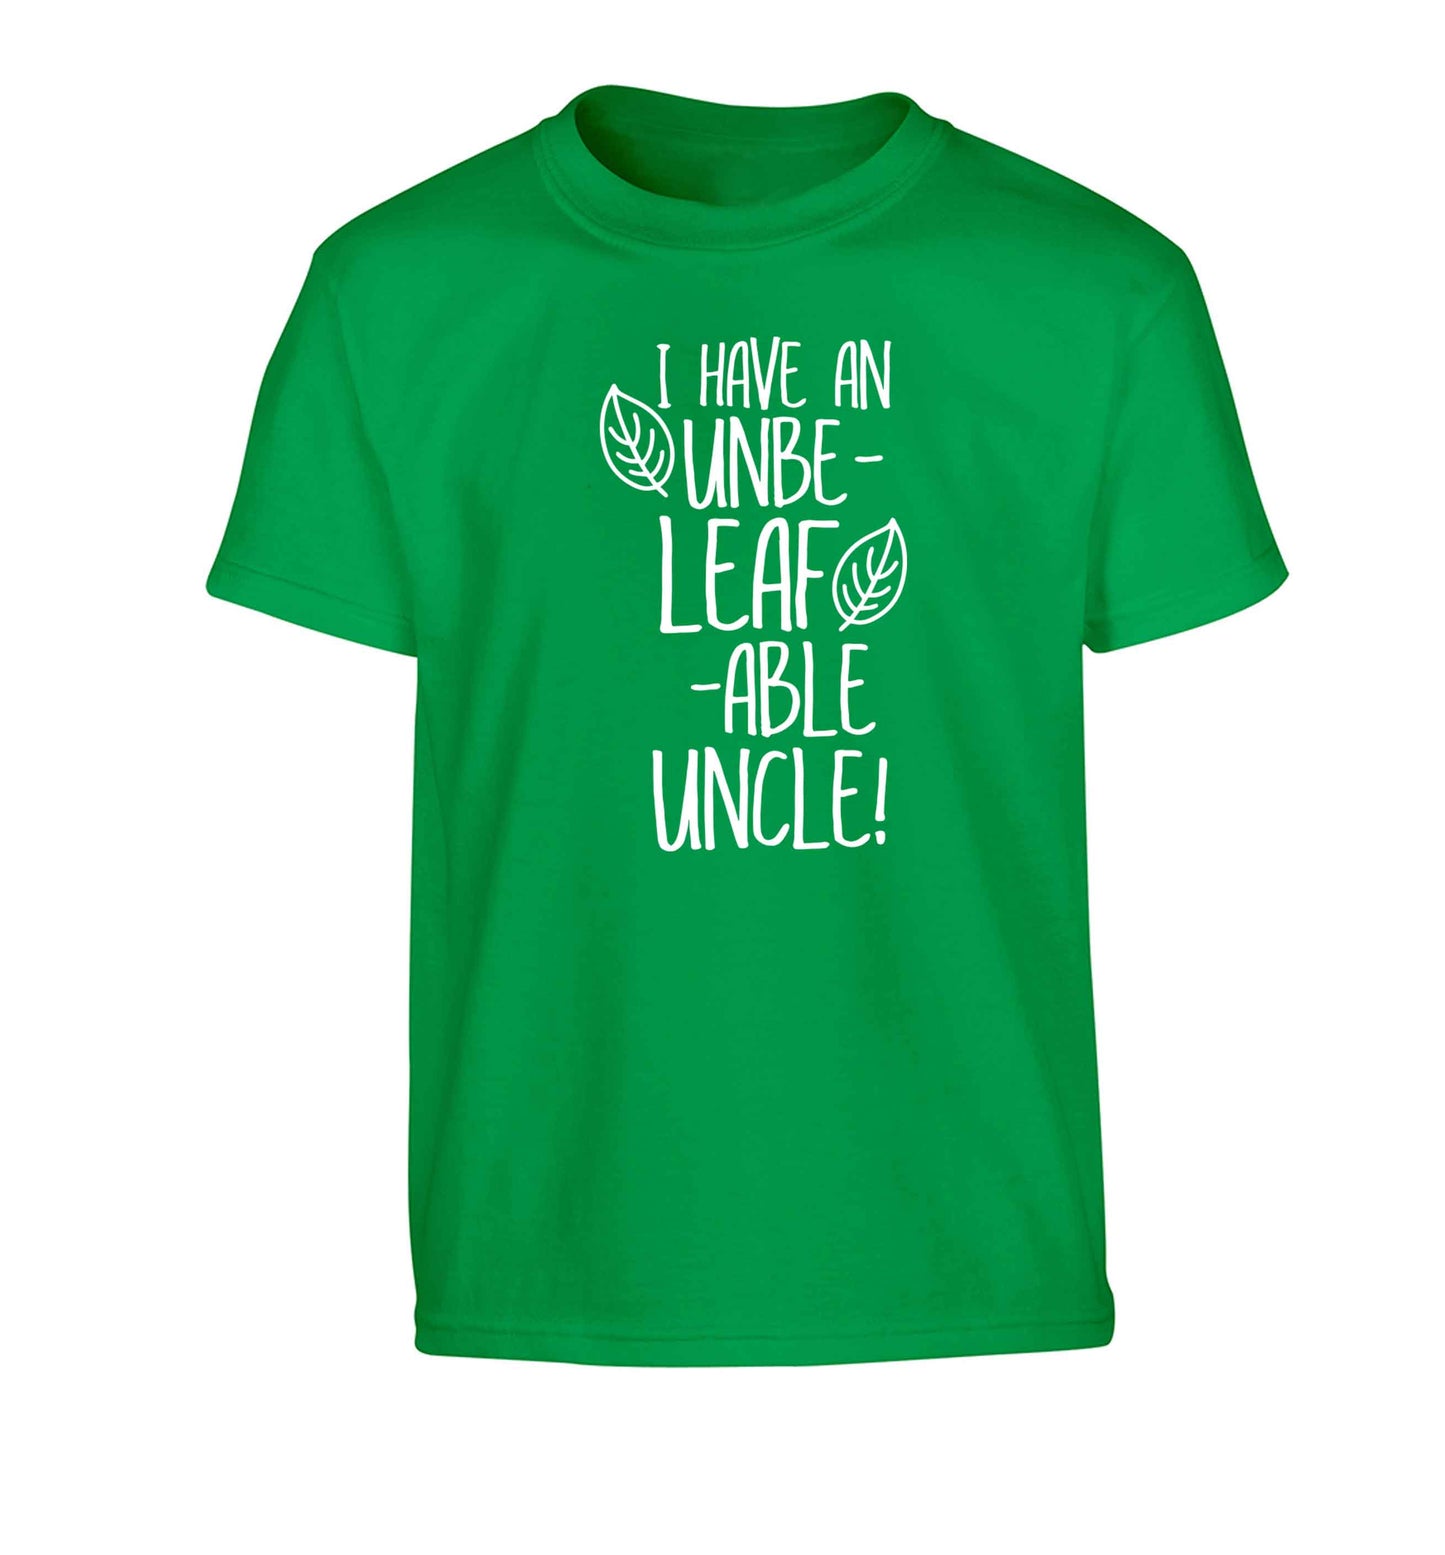 I have an unbe-leaf-able uncle Children's green Tshirt 12-13 Years